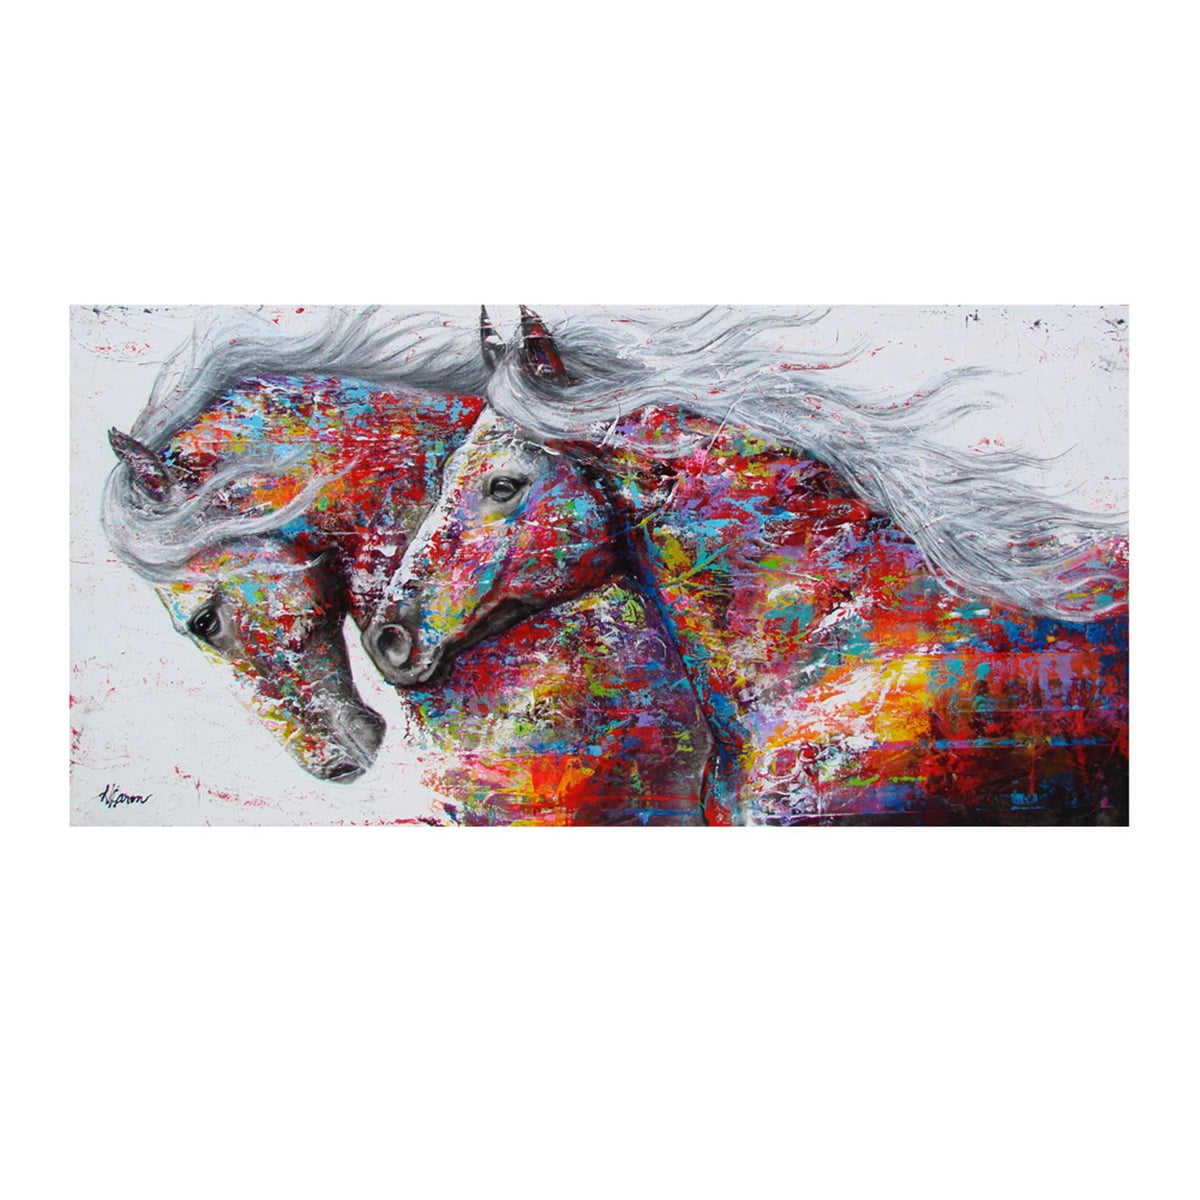 Horse Canvas Wall Art Home Decor,Stretched Ready to Hang Niwo ART Watercolor Horse and Flower 